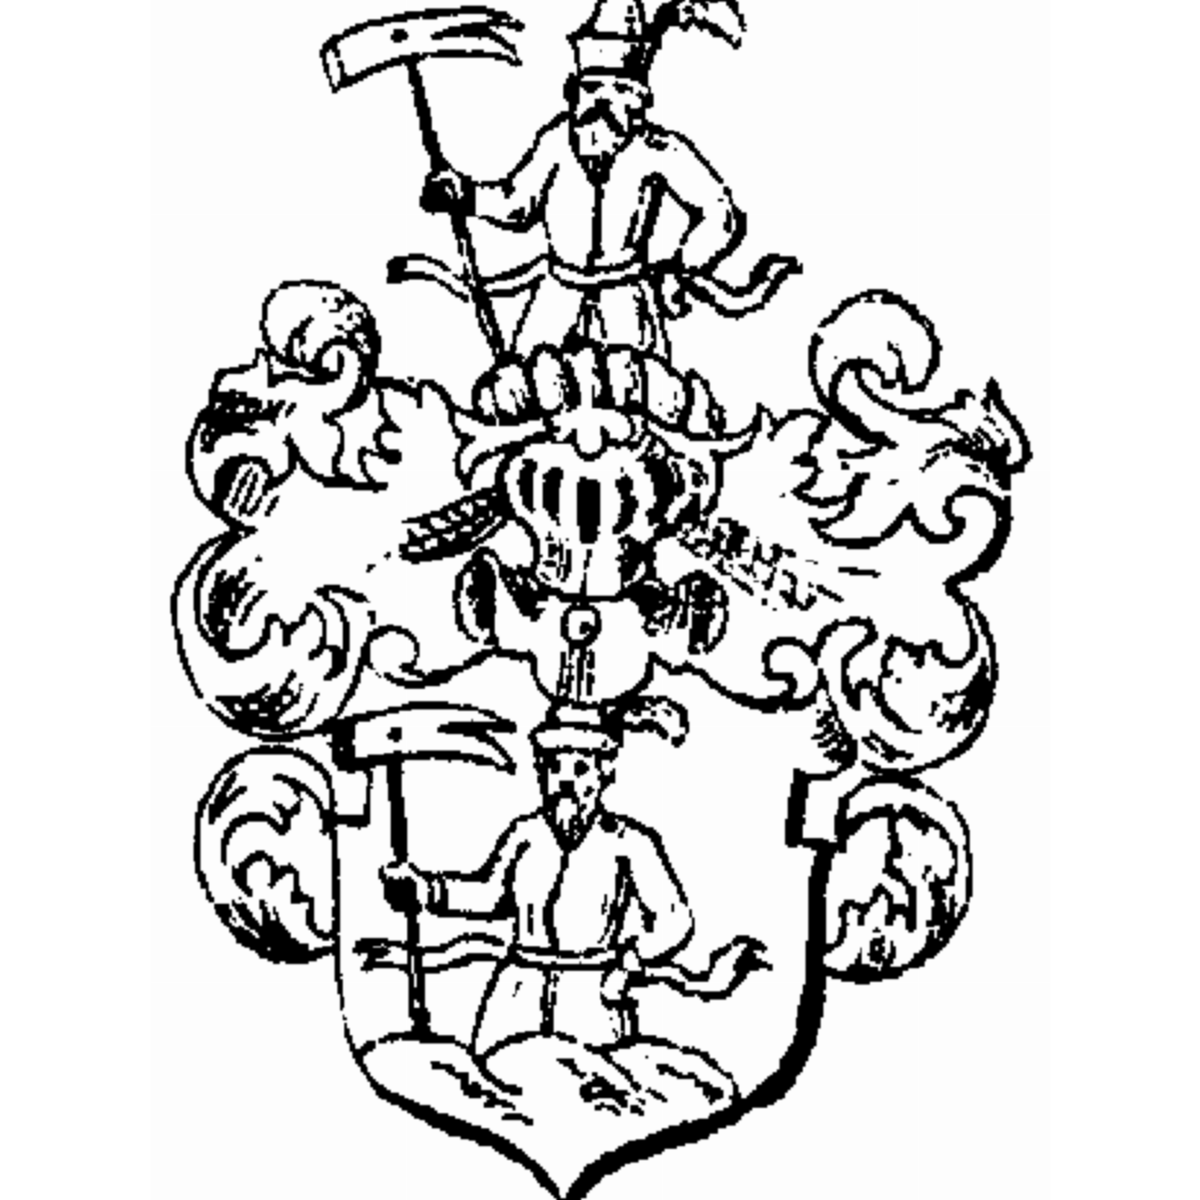 Coat of arms of family Blanchard